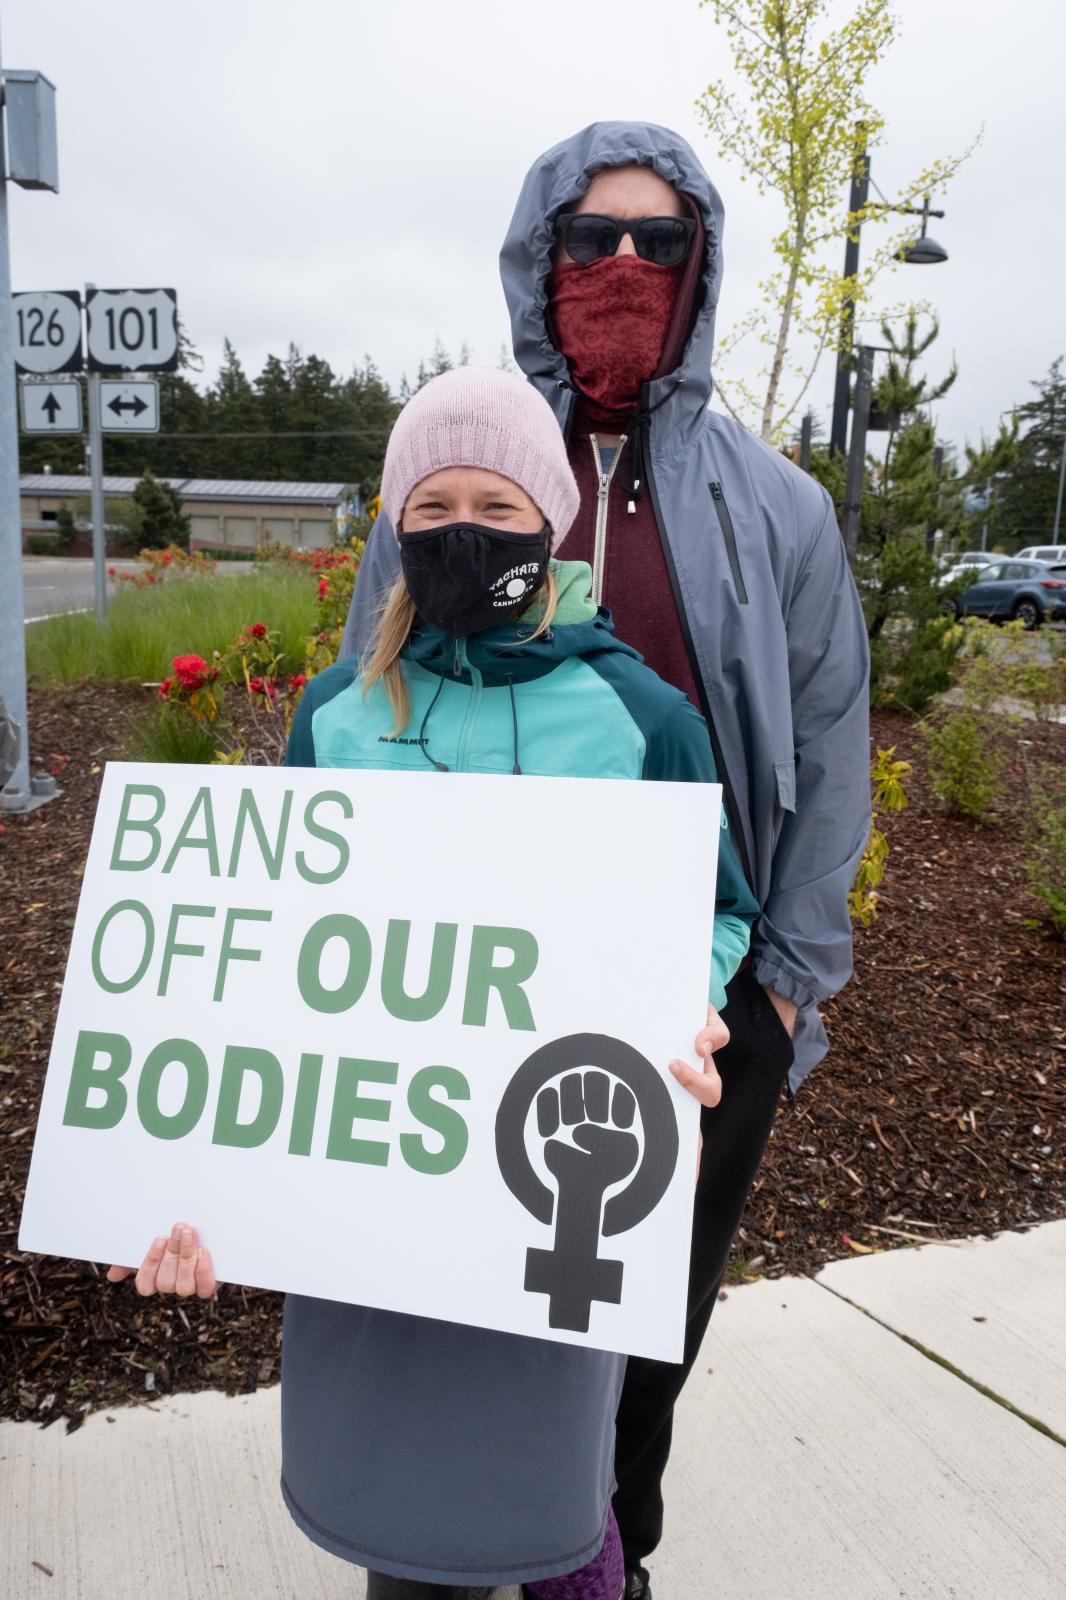 Bans Off Our Bodies Rally Florence Oregon - Couple with sign, Bans Off Our Bodies protest, Florence Oregon, May 14, 2022